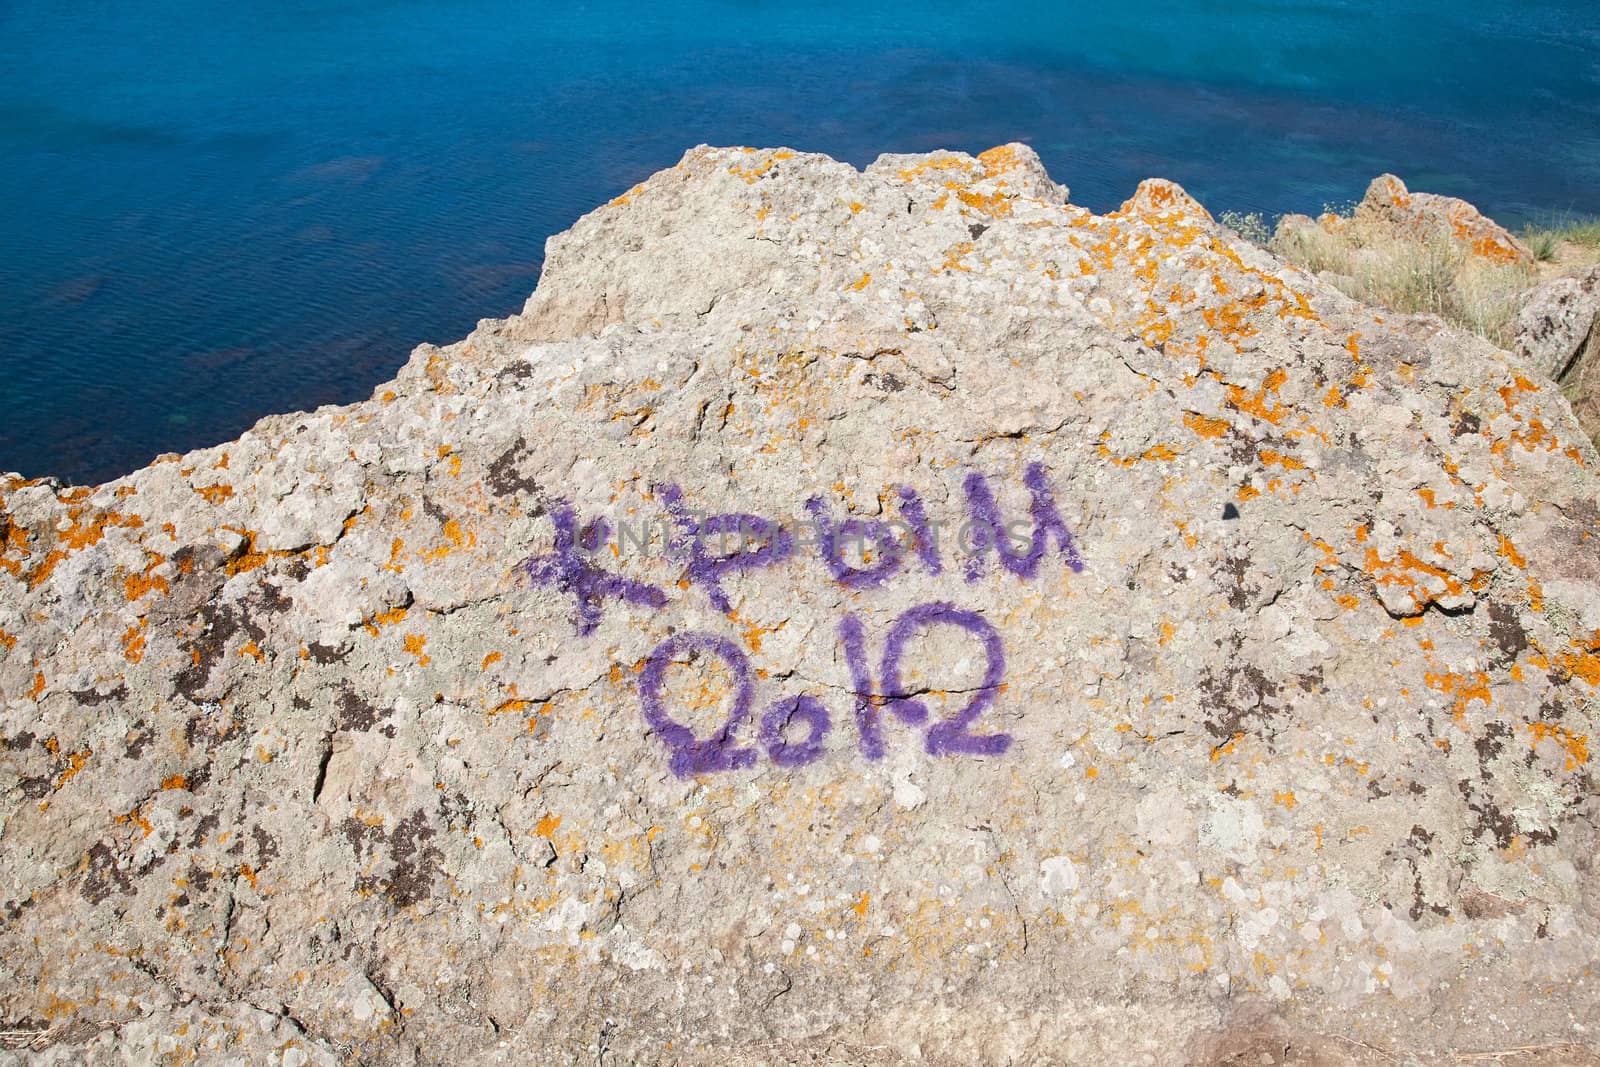 Crimea letters on the rock by RawGroup